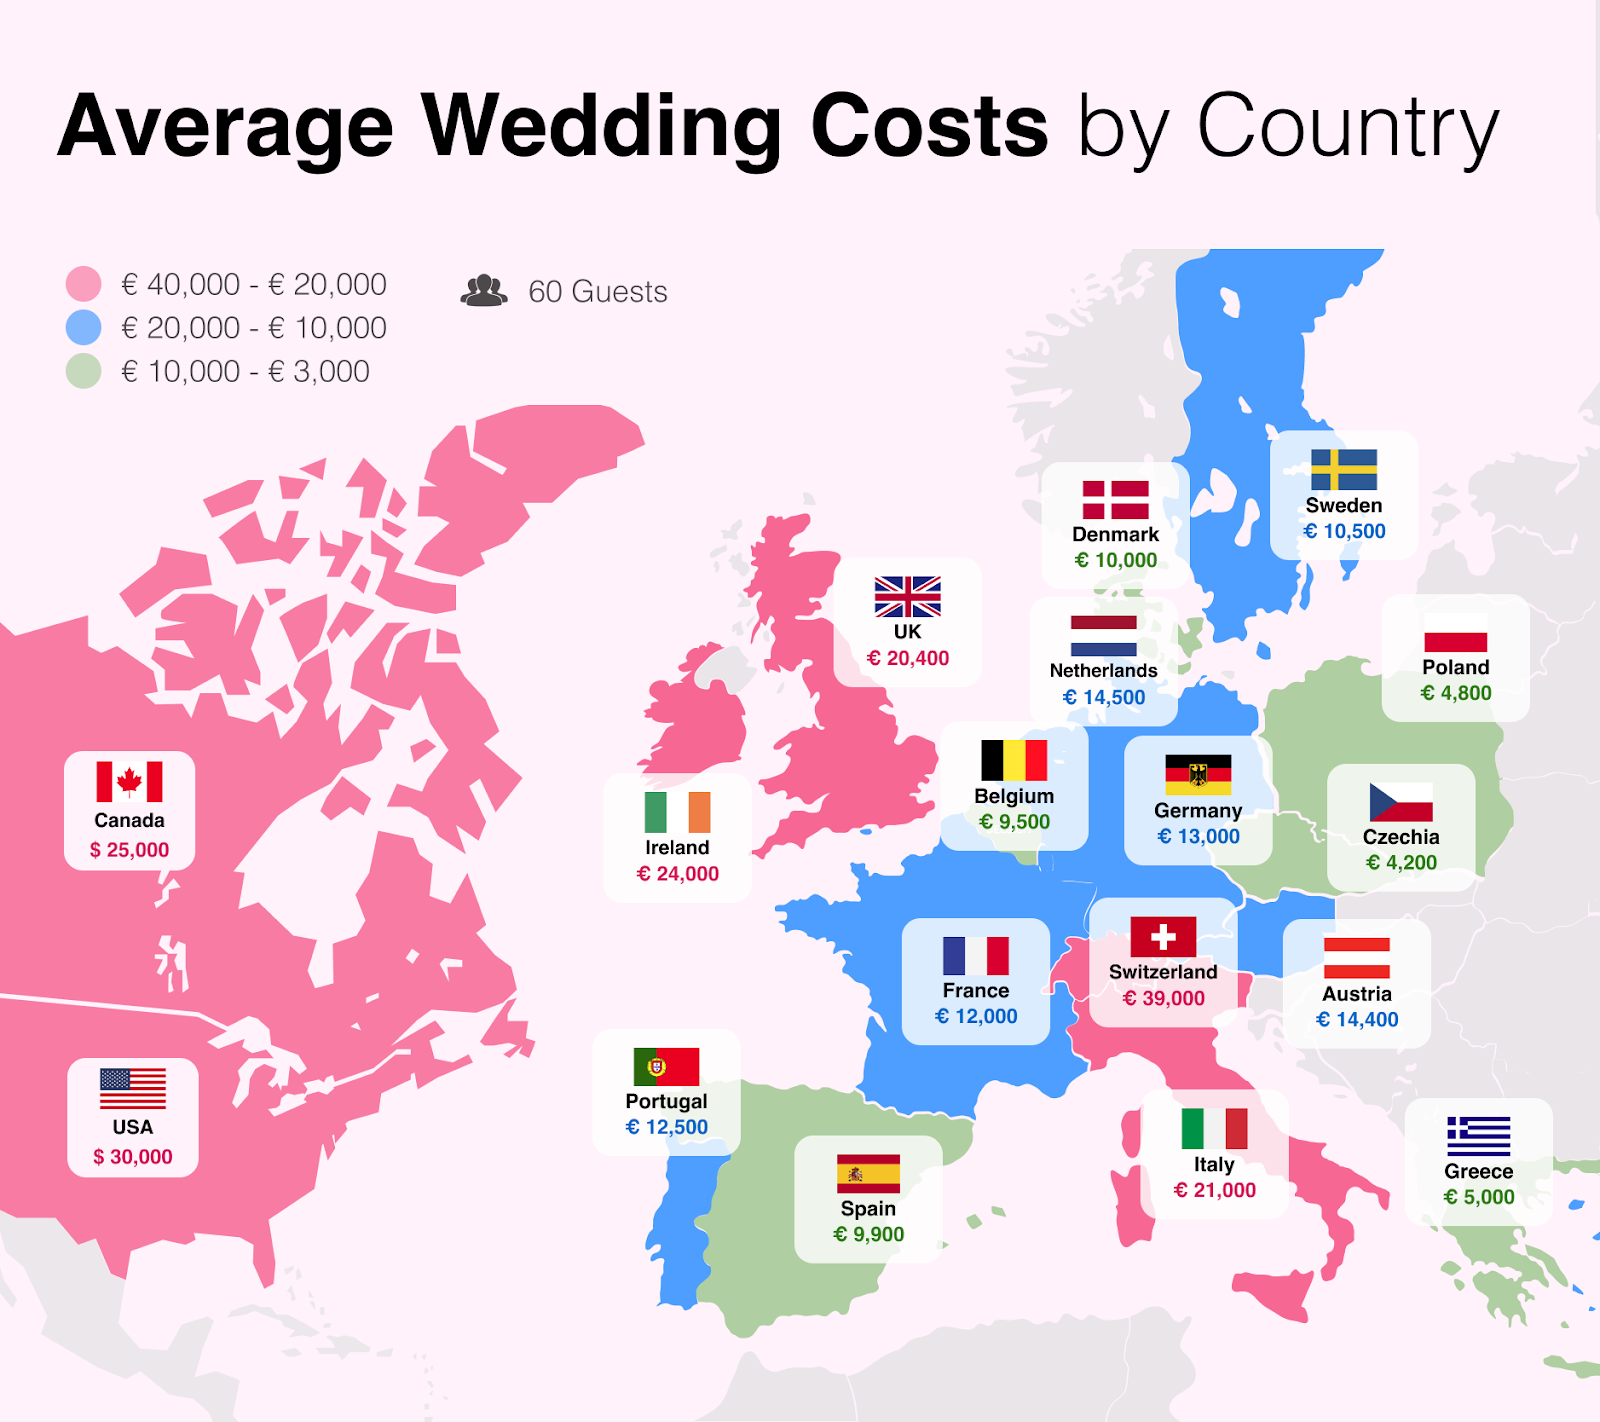 Average costs by country
